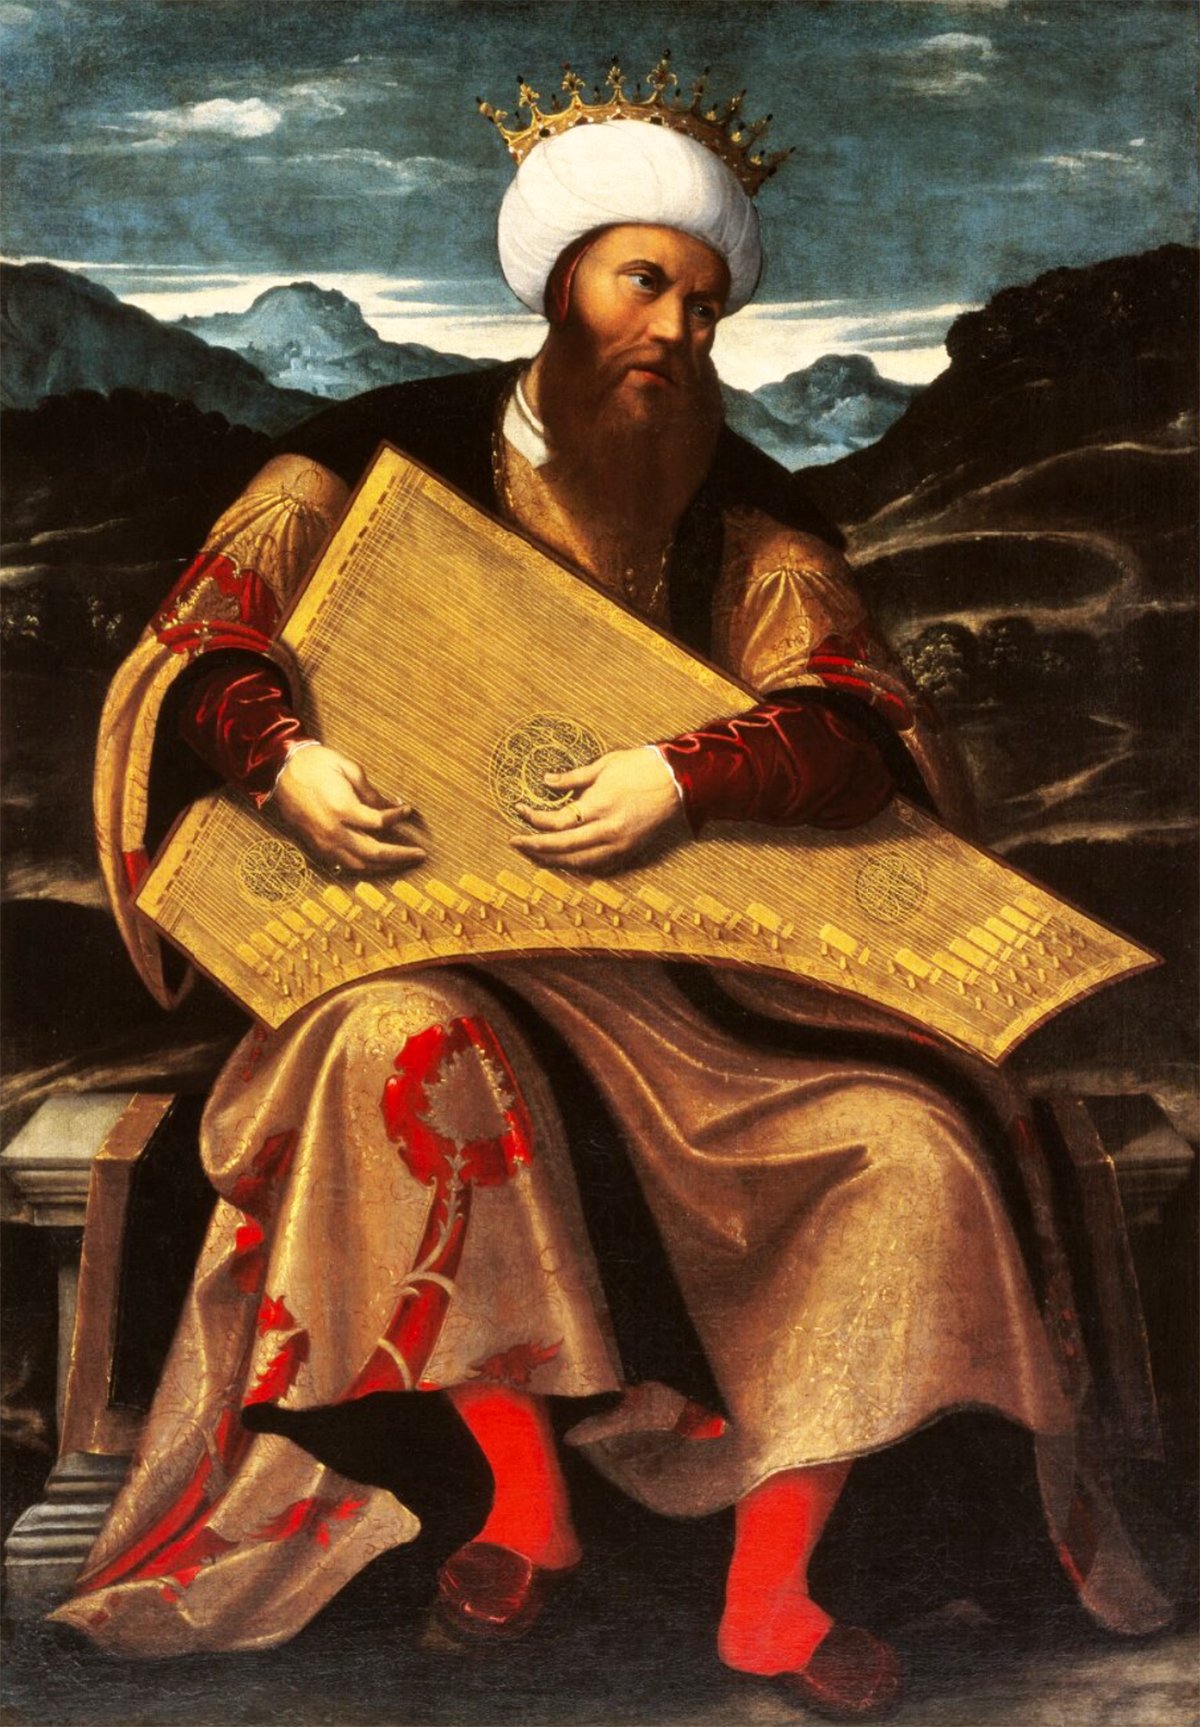 A striking portrait from the period 1540-50 by Girolamo da Santa Croce titled 'King David'. The central figure, King David, is depicted in rich, regal attire with a crown atop a white turban, highlighting his majestic status. He holds a large, ornate zither, symbolizing his role as a psalmist. His focused gaze is directed away from the viewer, suggesting a moment of contemplation or perhaps inspiration for his next psalm. The dark, dramatic background showcases a rugged mountainous landscape under a stormy sky, creating a contrast with the luminous and detailed depiction of the king. David's robe shimmers with golden embroideries and the bright red of his undergarments peeks out, further emphasizing the lavishness of the scene.